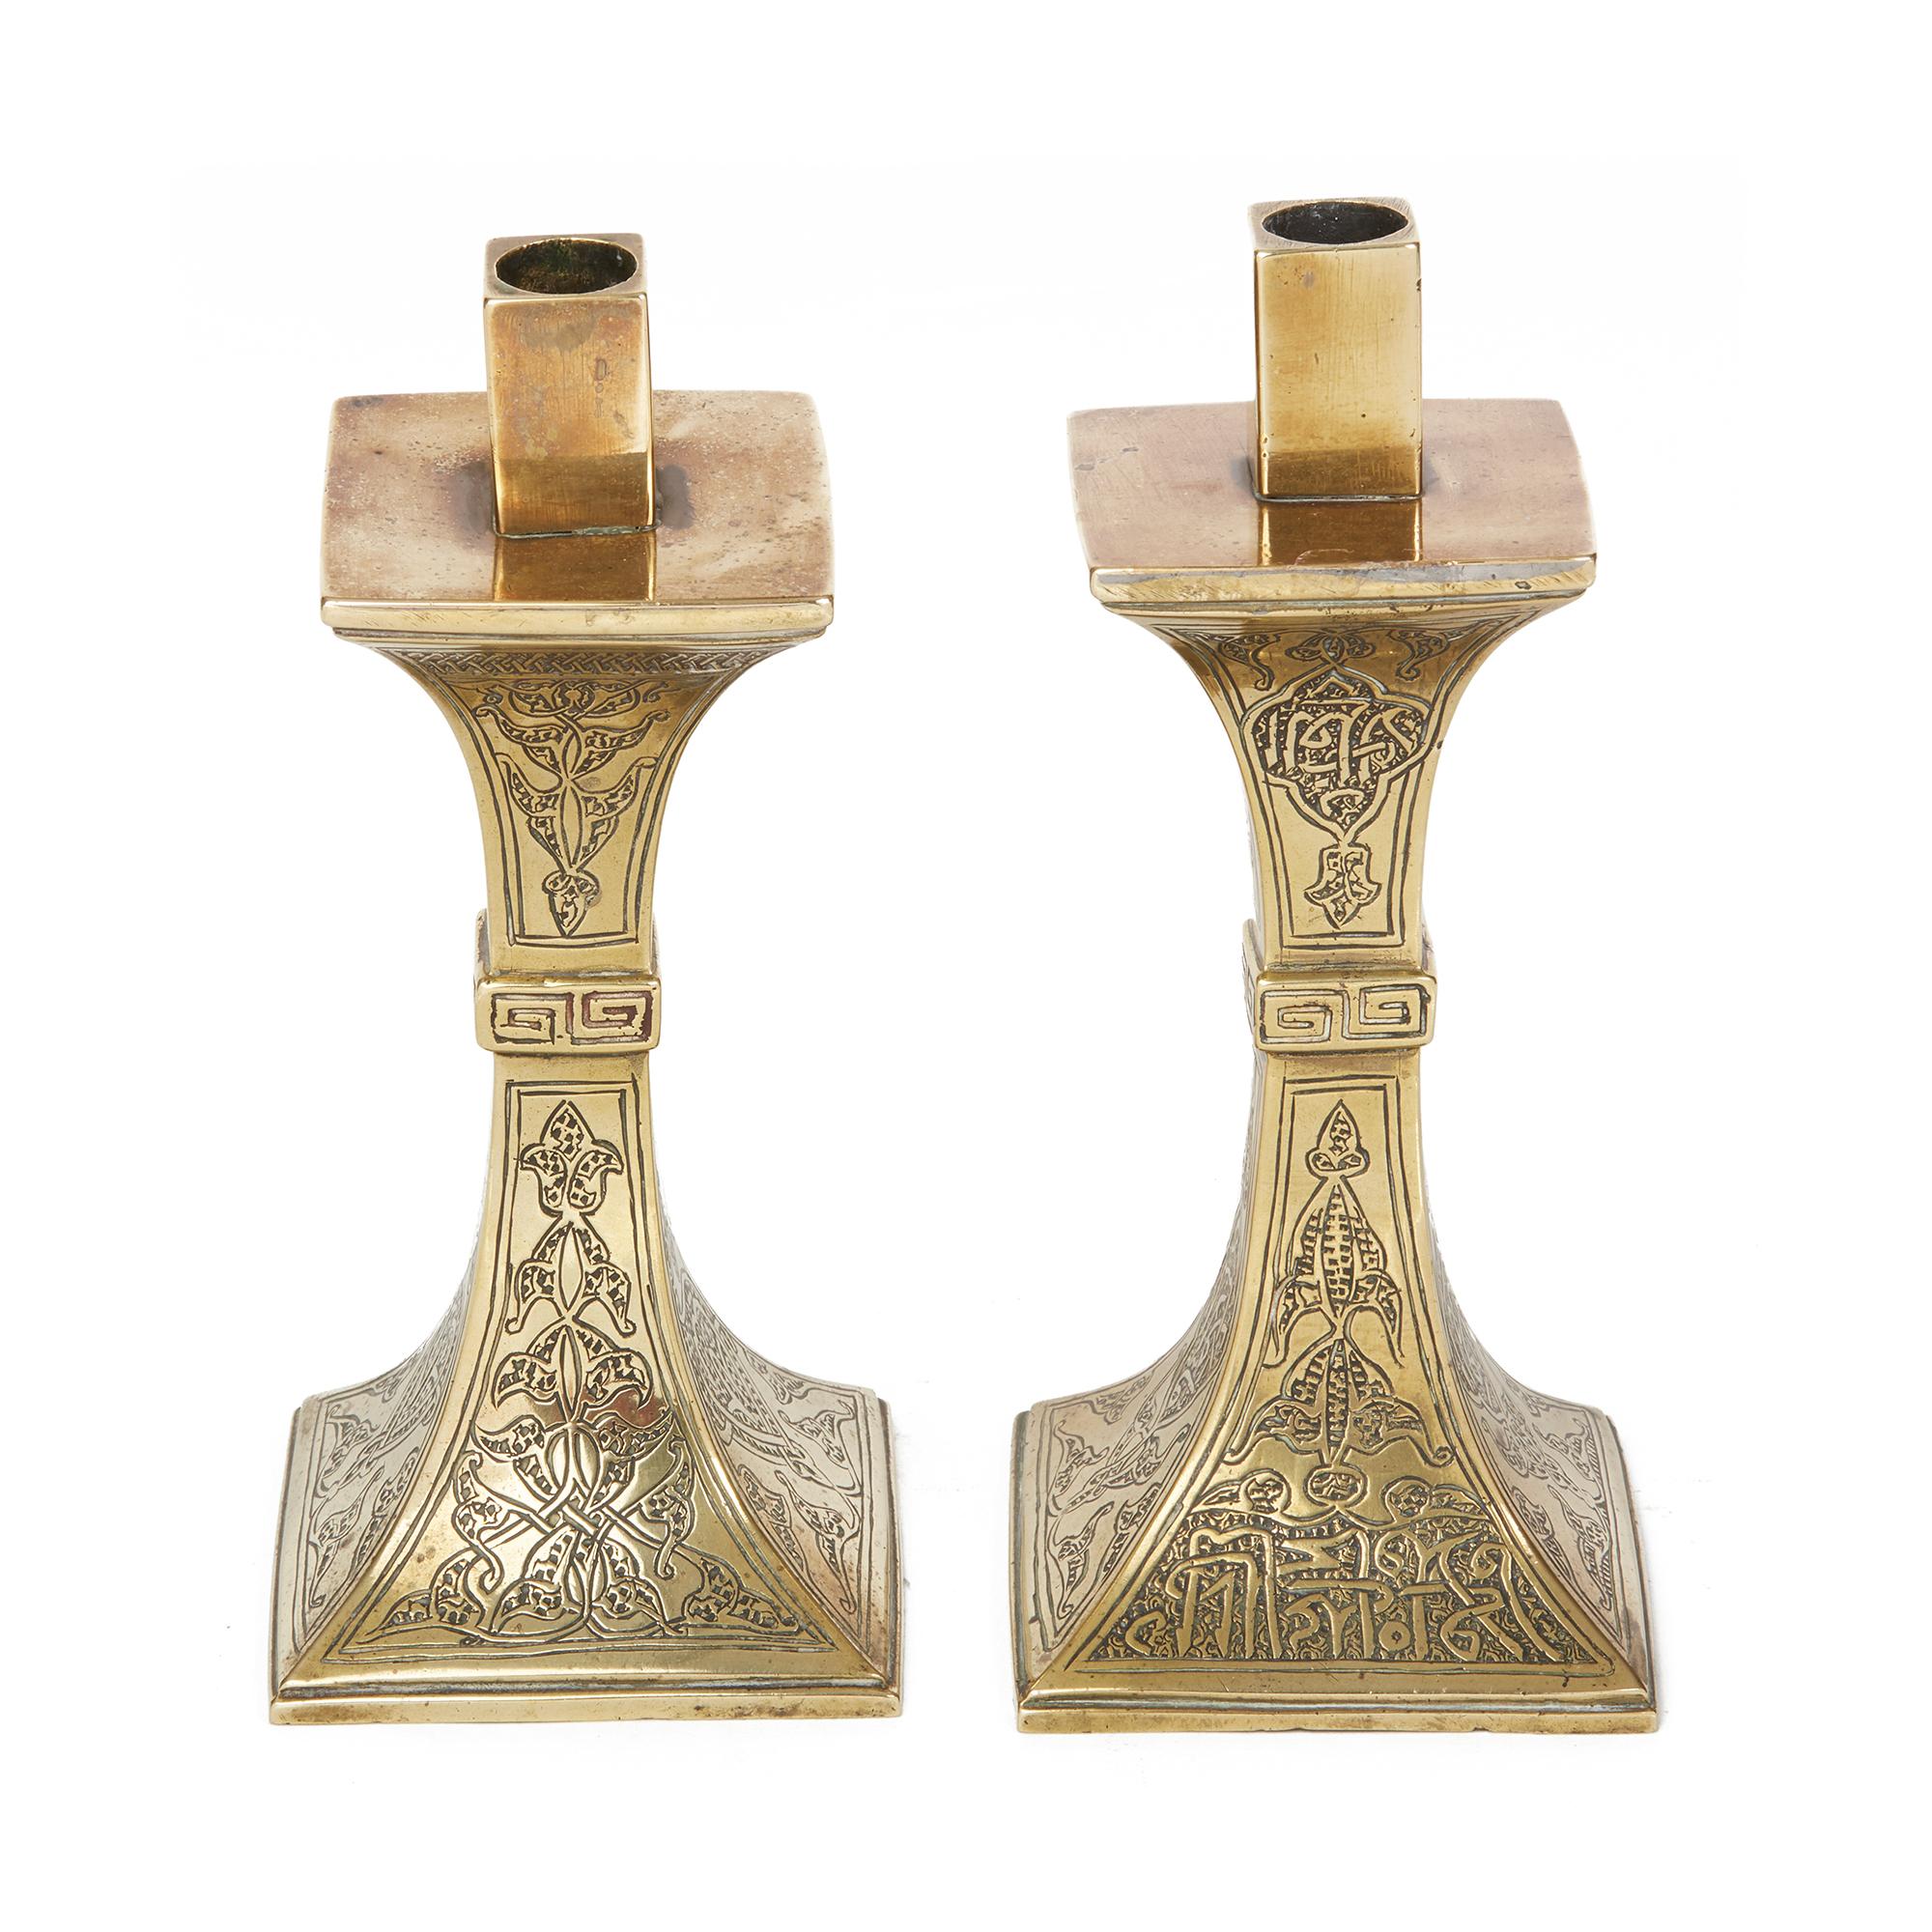 Asian Antique Islamic Calligraphy Brass Candlesticks, 19th Century For Sale